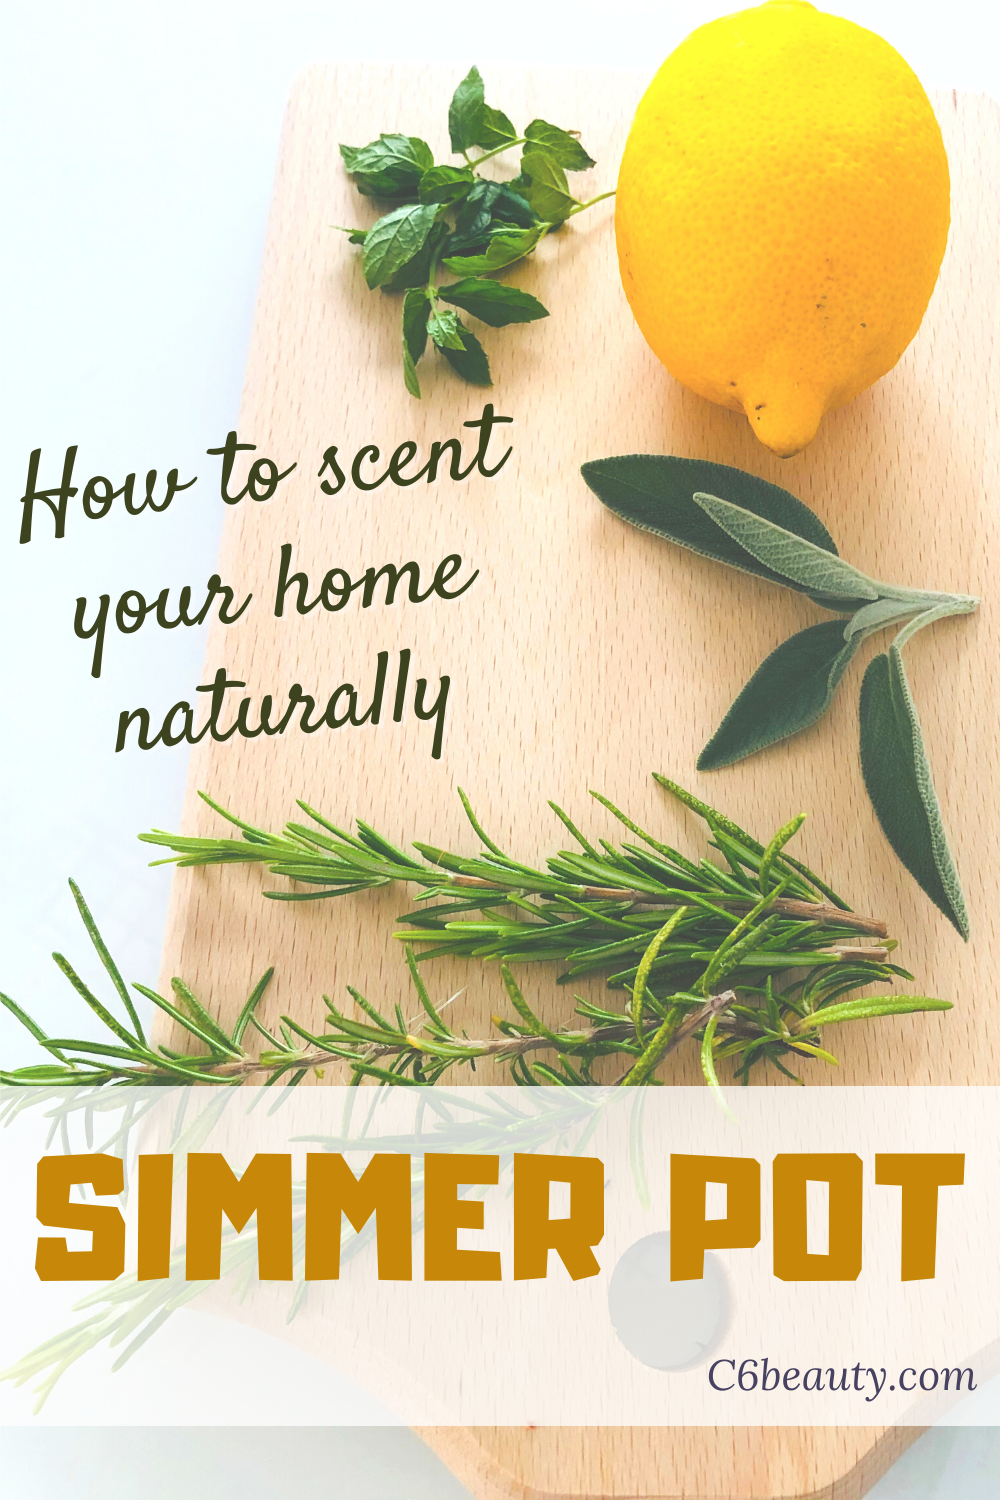 How to make your house smell good - C6 Beauty